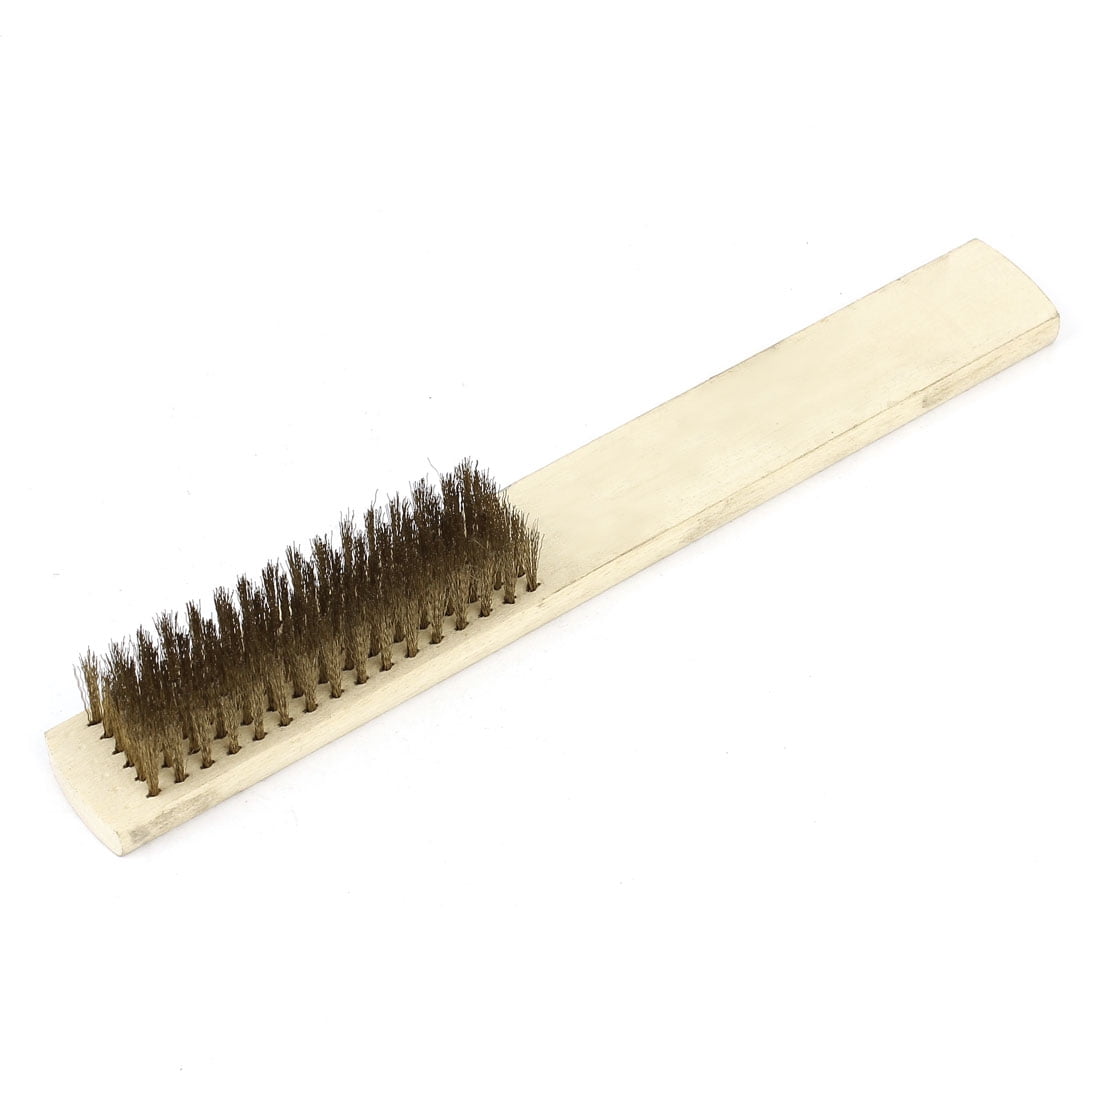 Details about   27cm Length Wooden Handle Brass Wire Cleaning Brush Hand Tool 